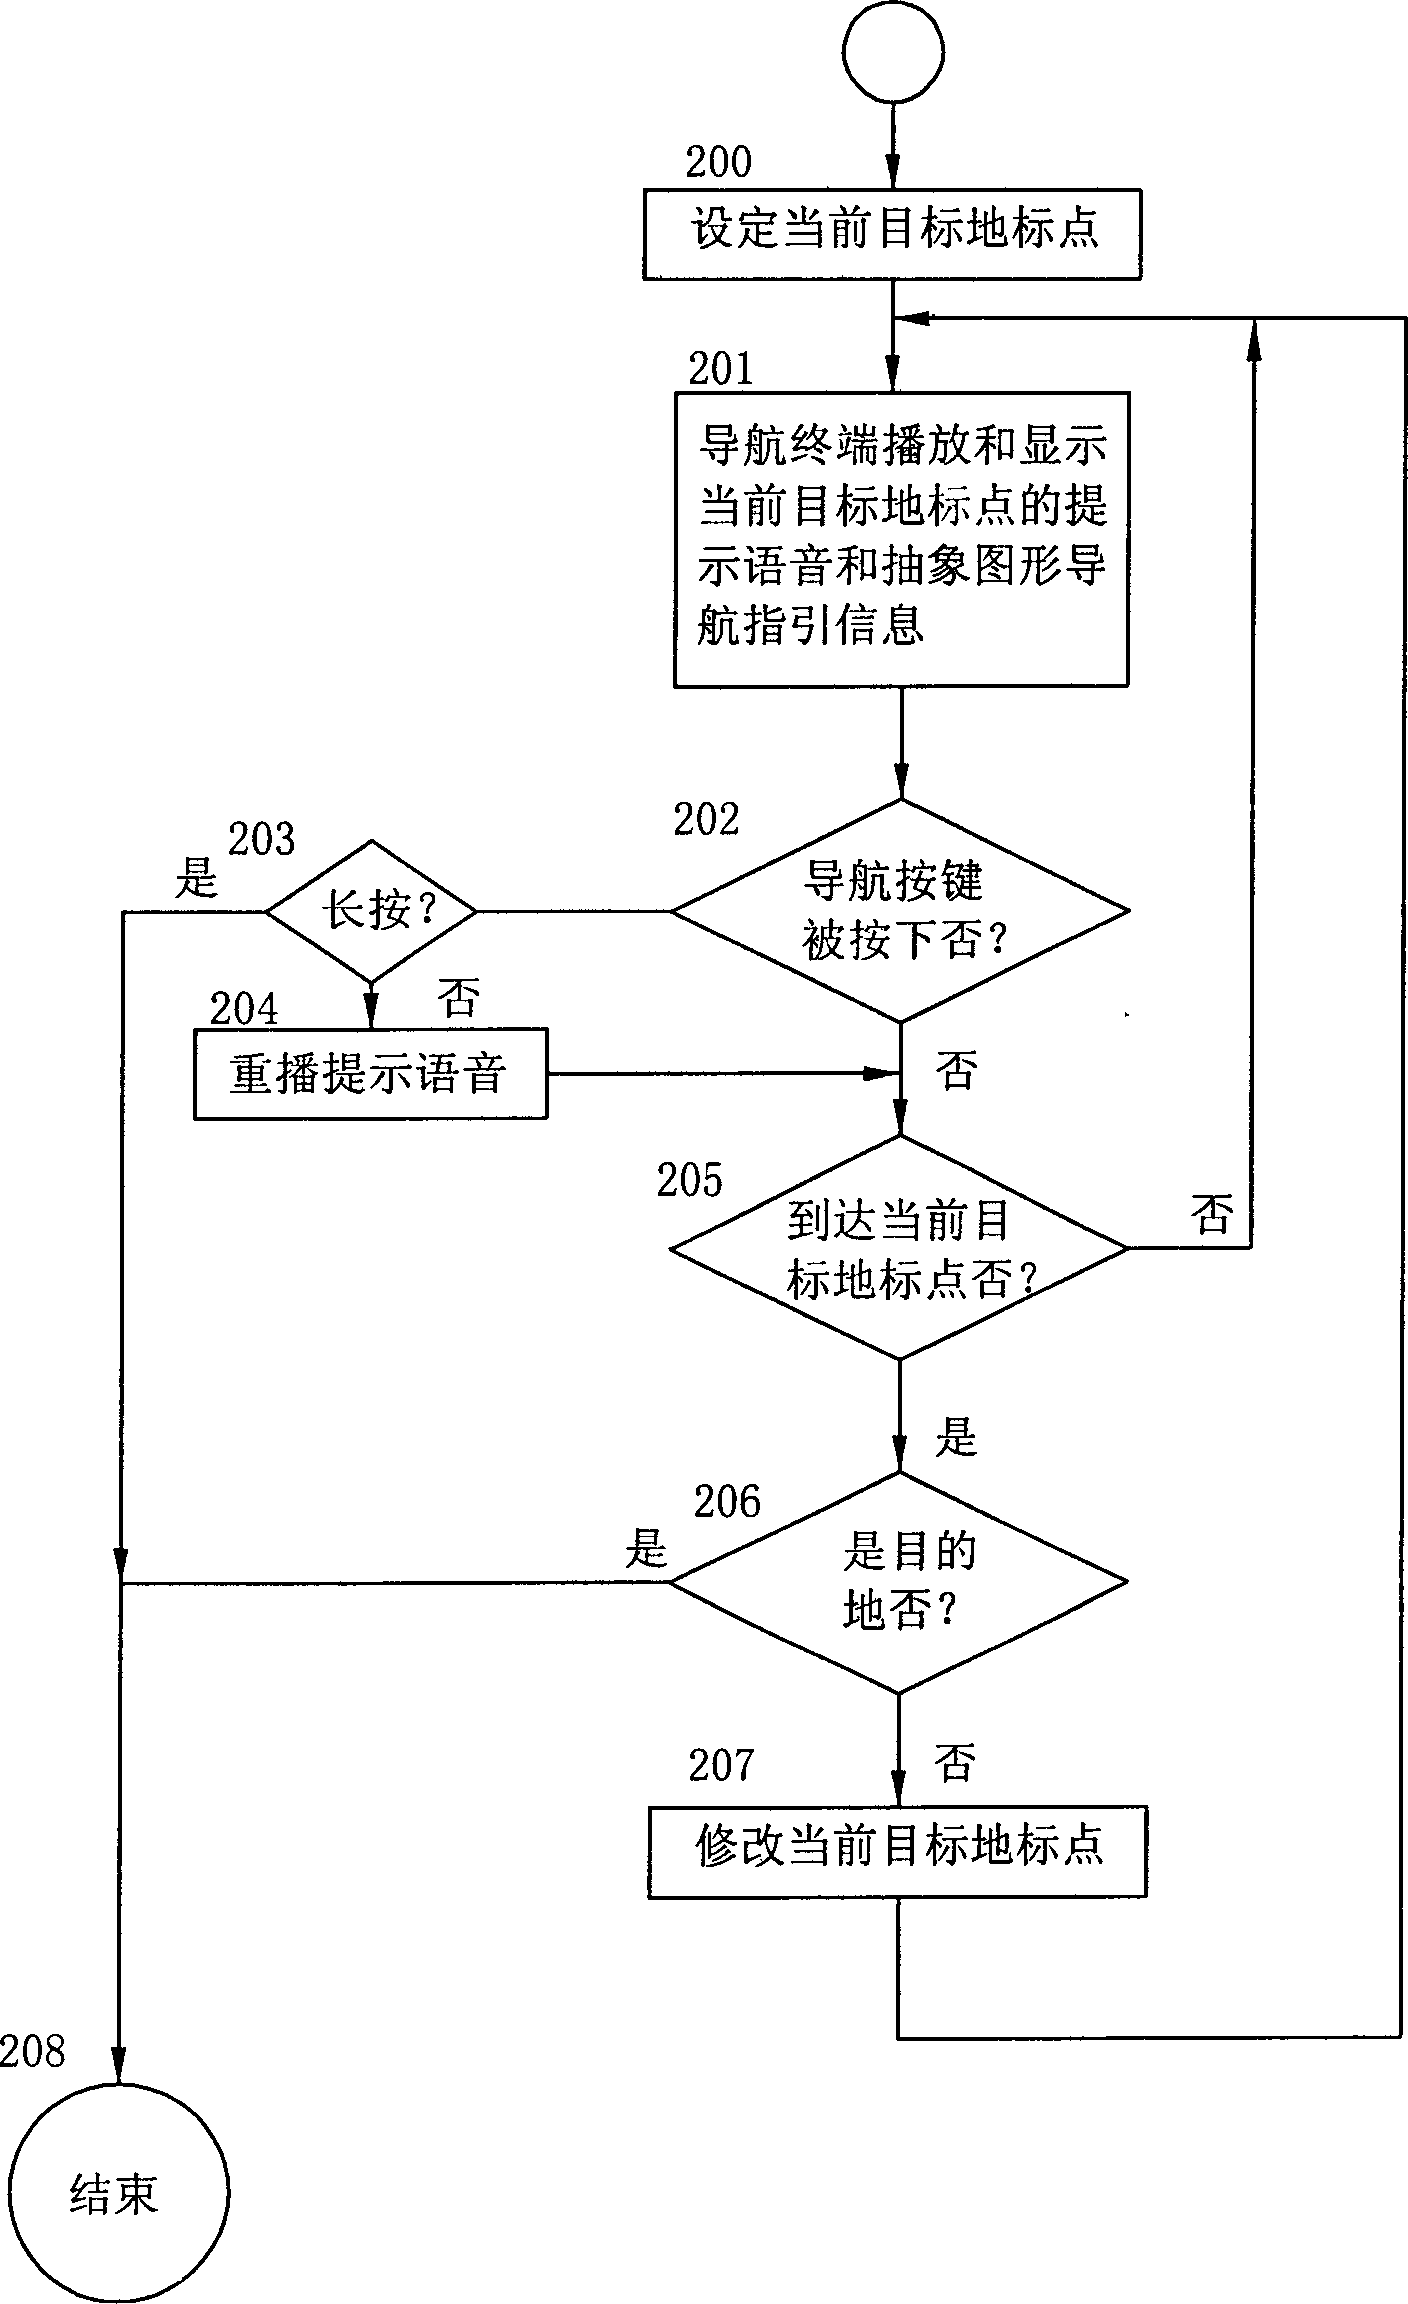 Method for navigation of vehicle with satellite location and communication equipment